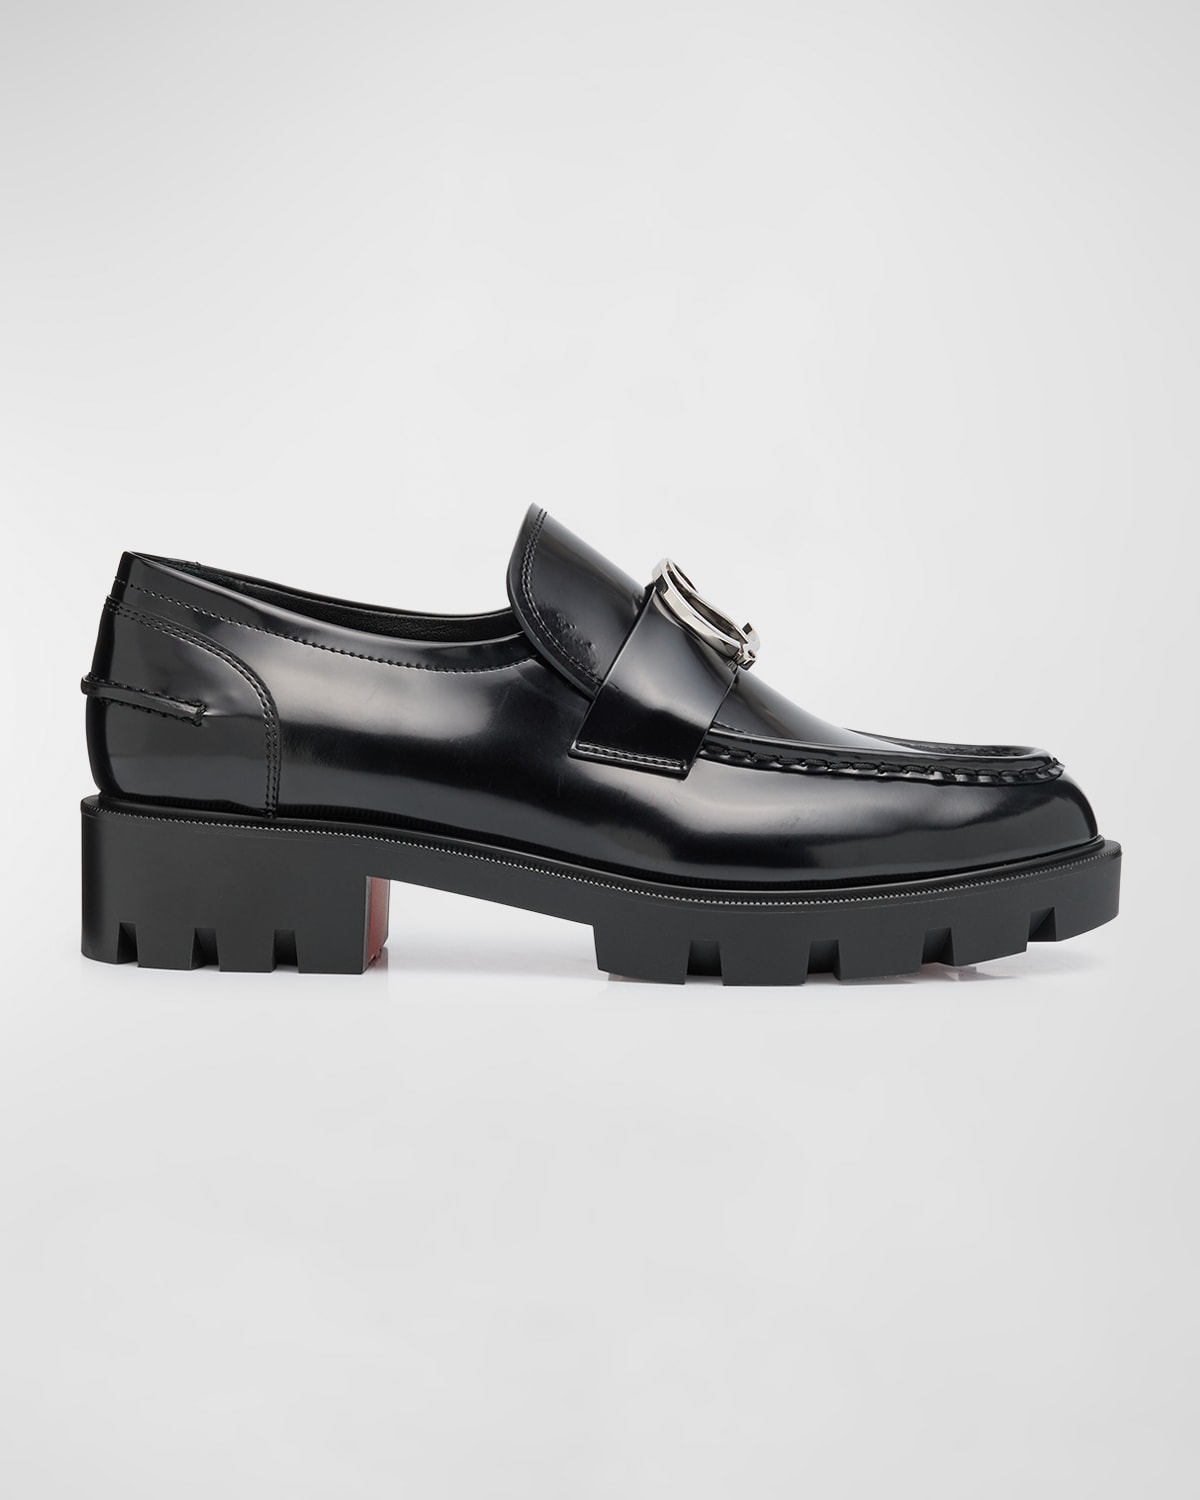 Christian Louboutin Patent Medallion Red Sole Loafers | Neiman Marcus